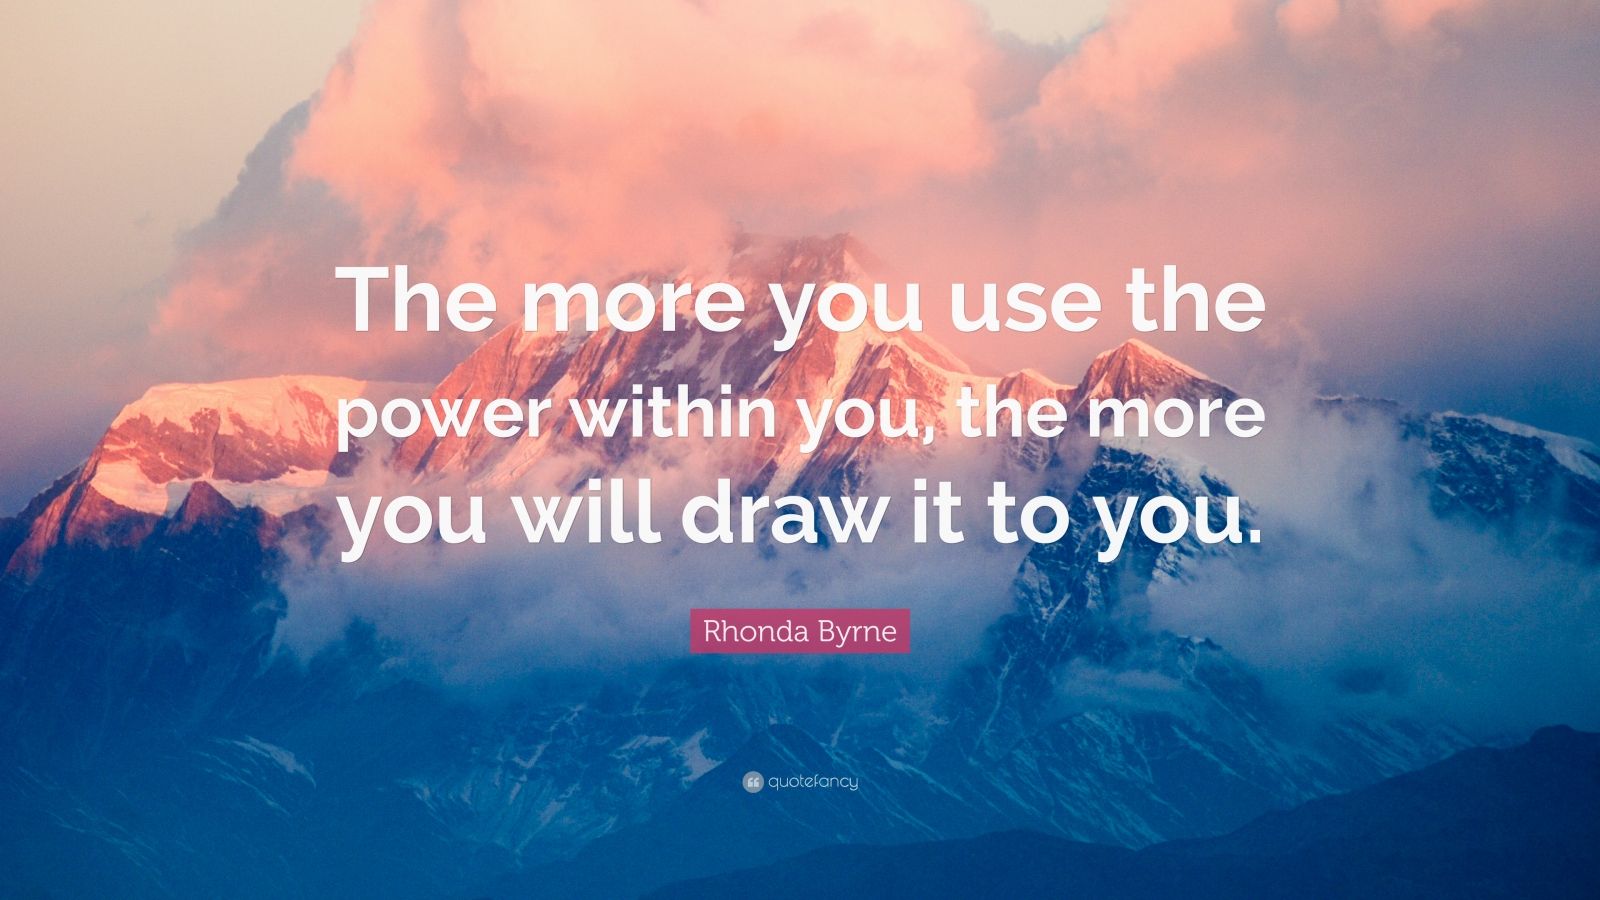 Rhonda Byrne Quote: “The more you use the power within you, the more